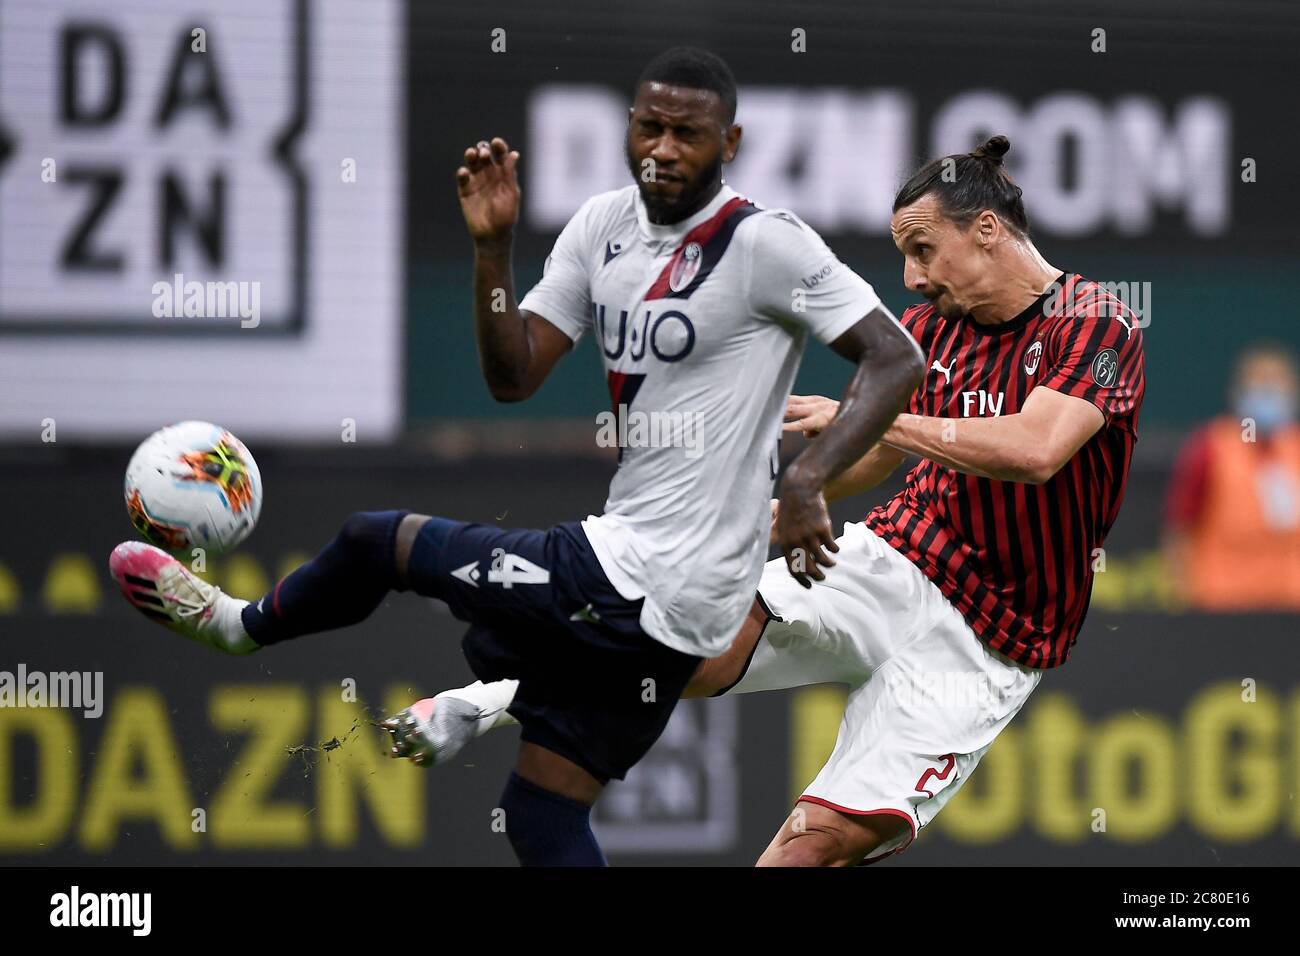 Milan, Italy - 18 July, 2020: Zlatan Ibrahimovic (R) of AC Milan and Stefano Denswil of Bologna FC in action during the Serie A football match between AC Milan and Bologna FC. AC Milan won 5-1 over Bologna FC. Credit: Nicolò Campo/Alamy Live News Stock Photo